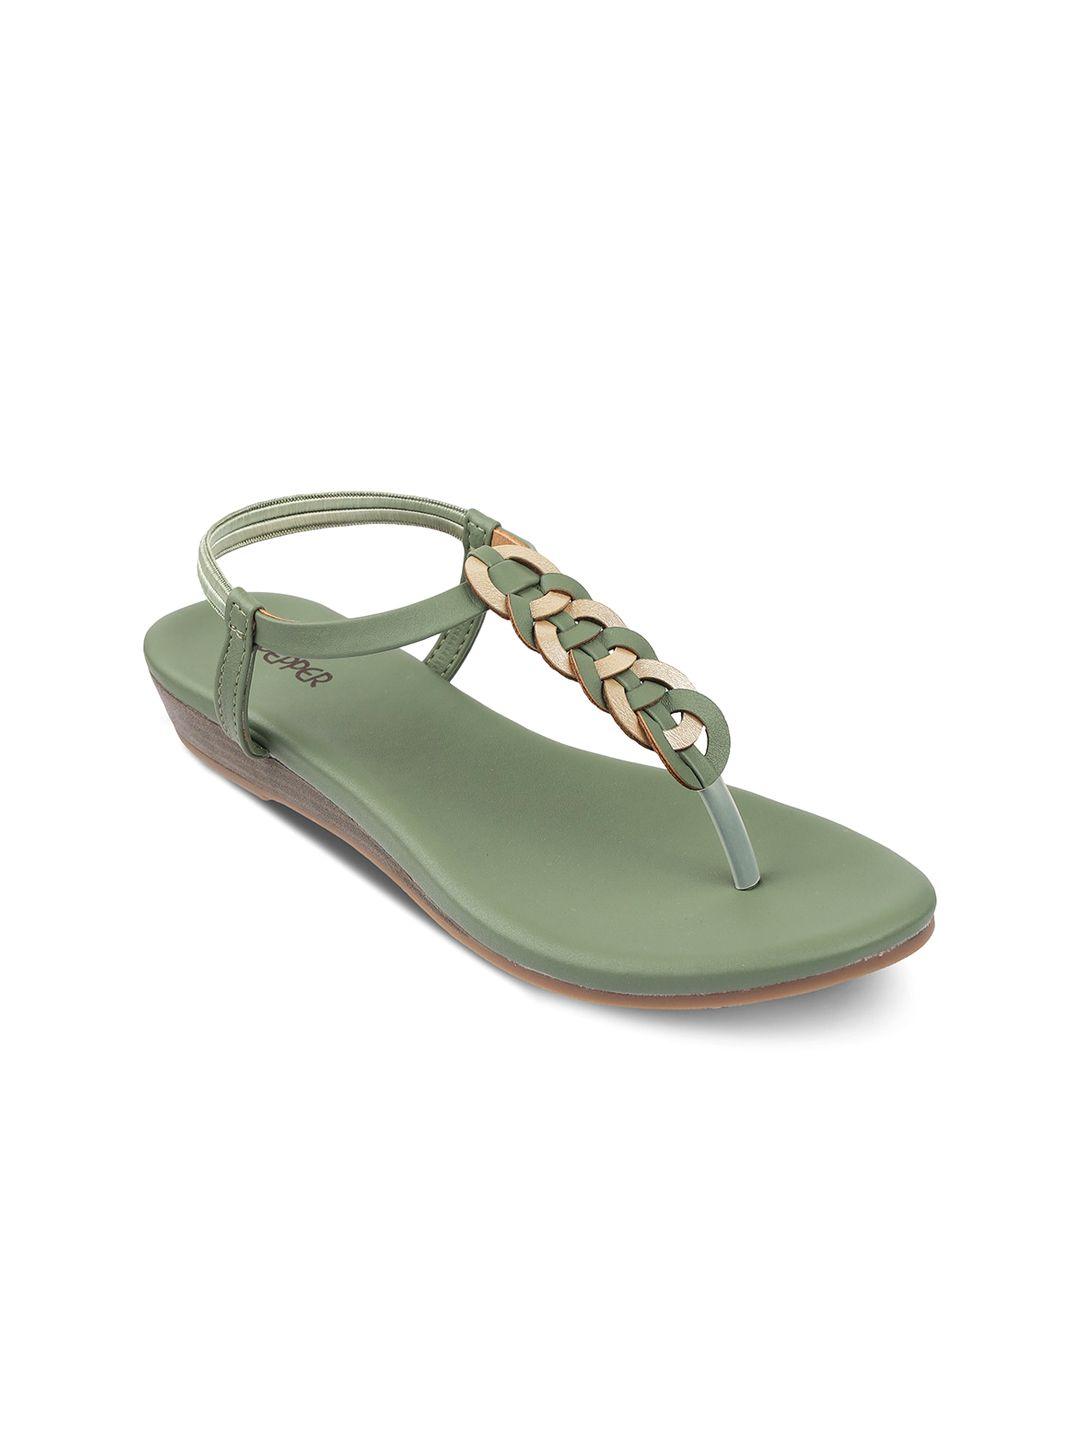 pepper-braided-t-strap-flats-with-backstrap